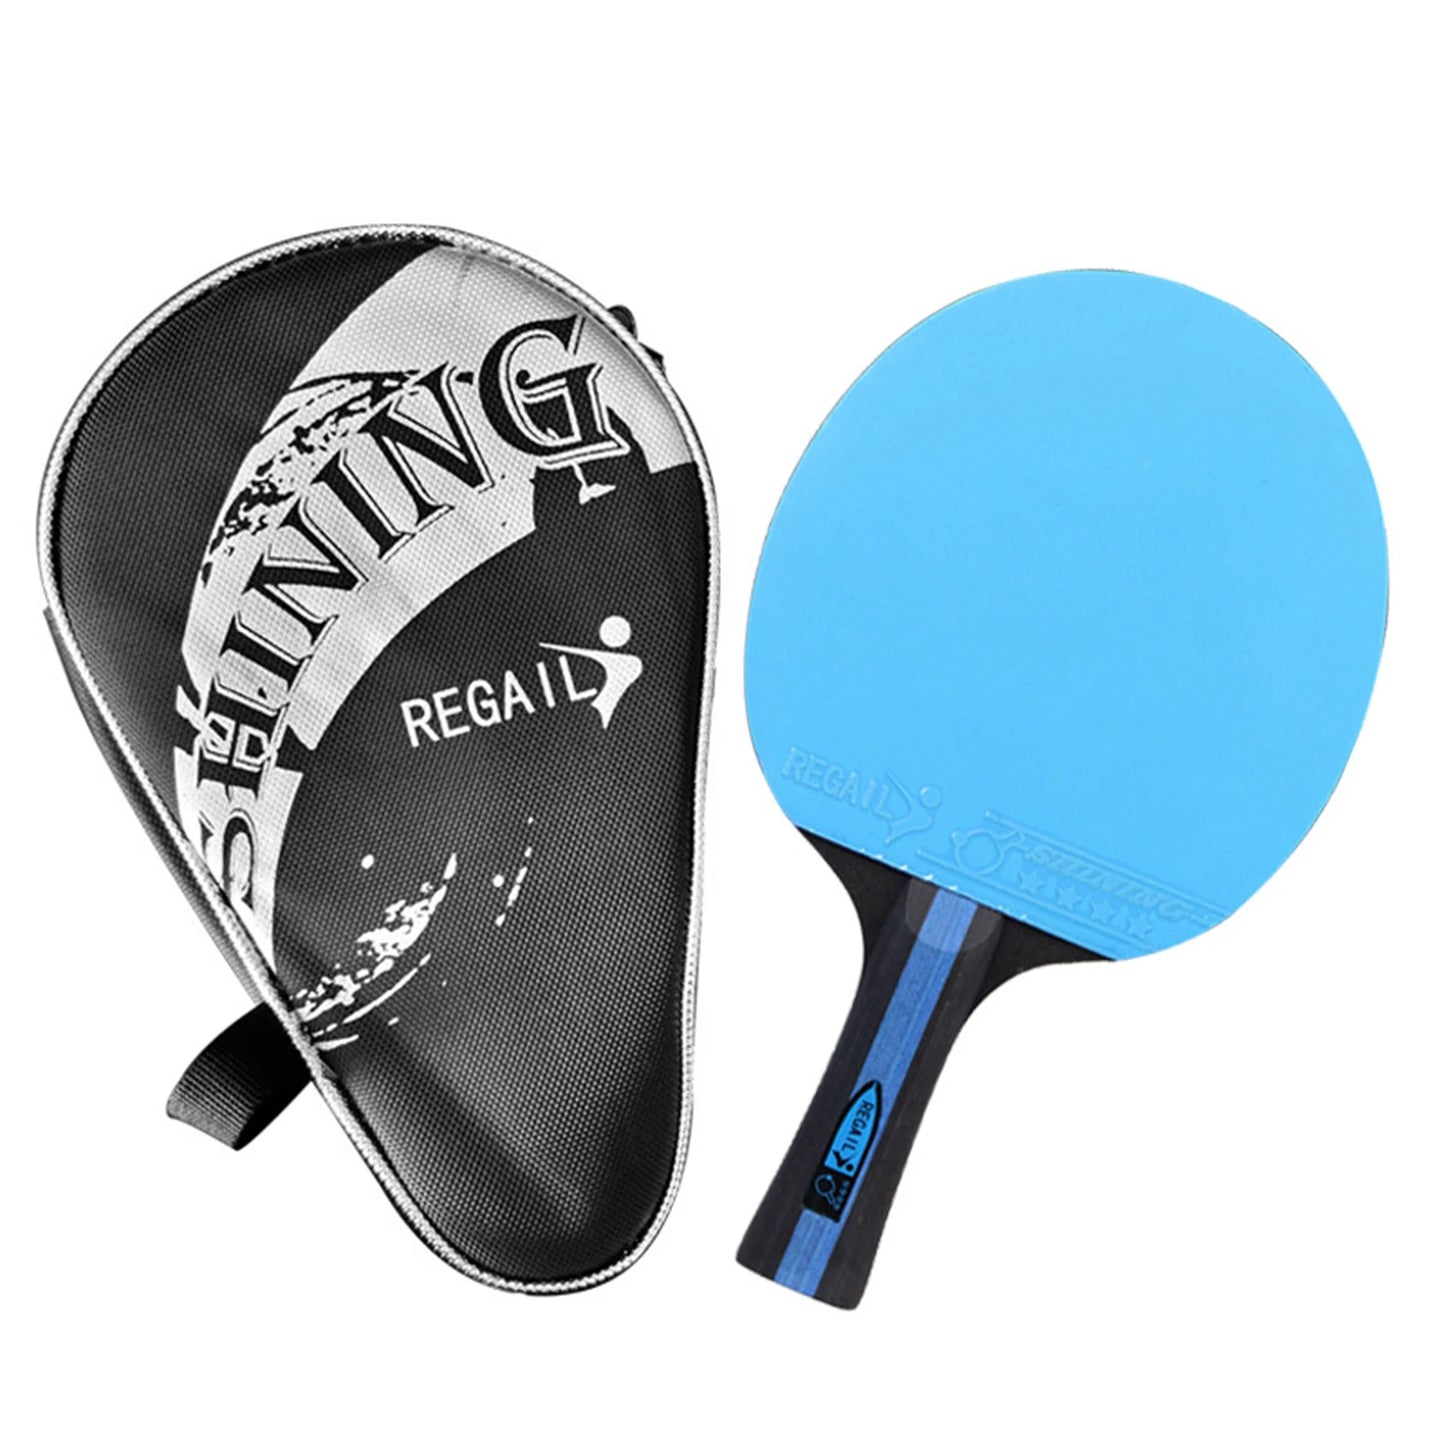 Table Tennis Set Pack of 2 Ping Pong Rackets with 3 Balls and Carry Bag